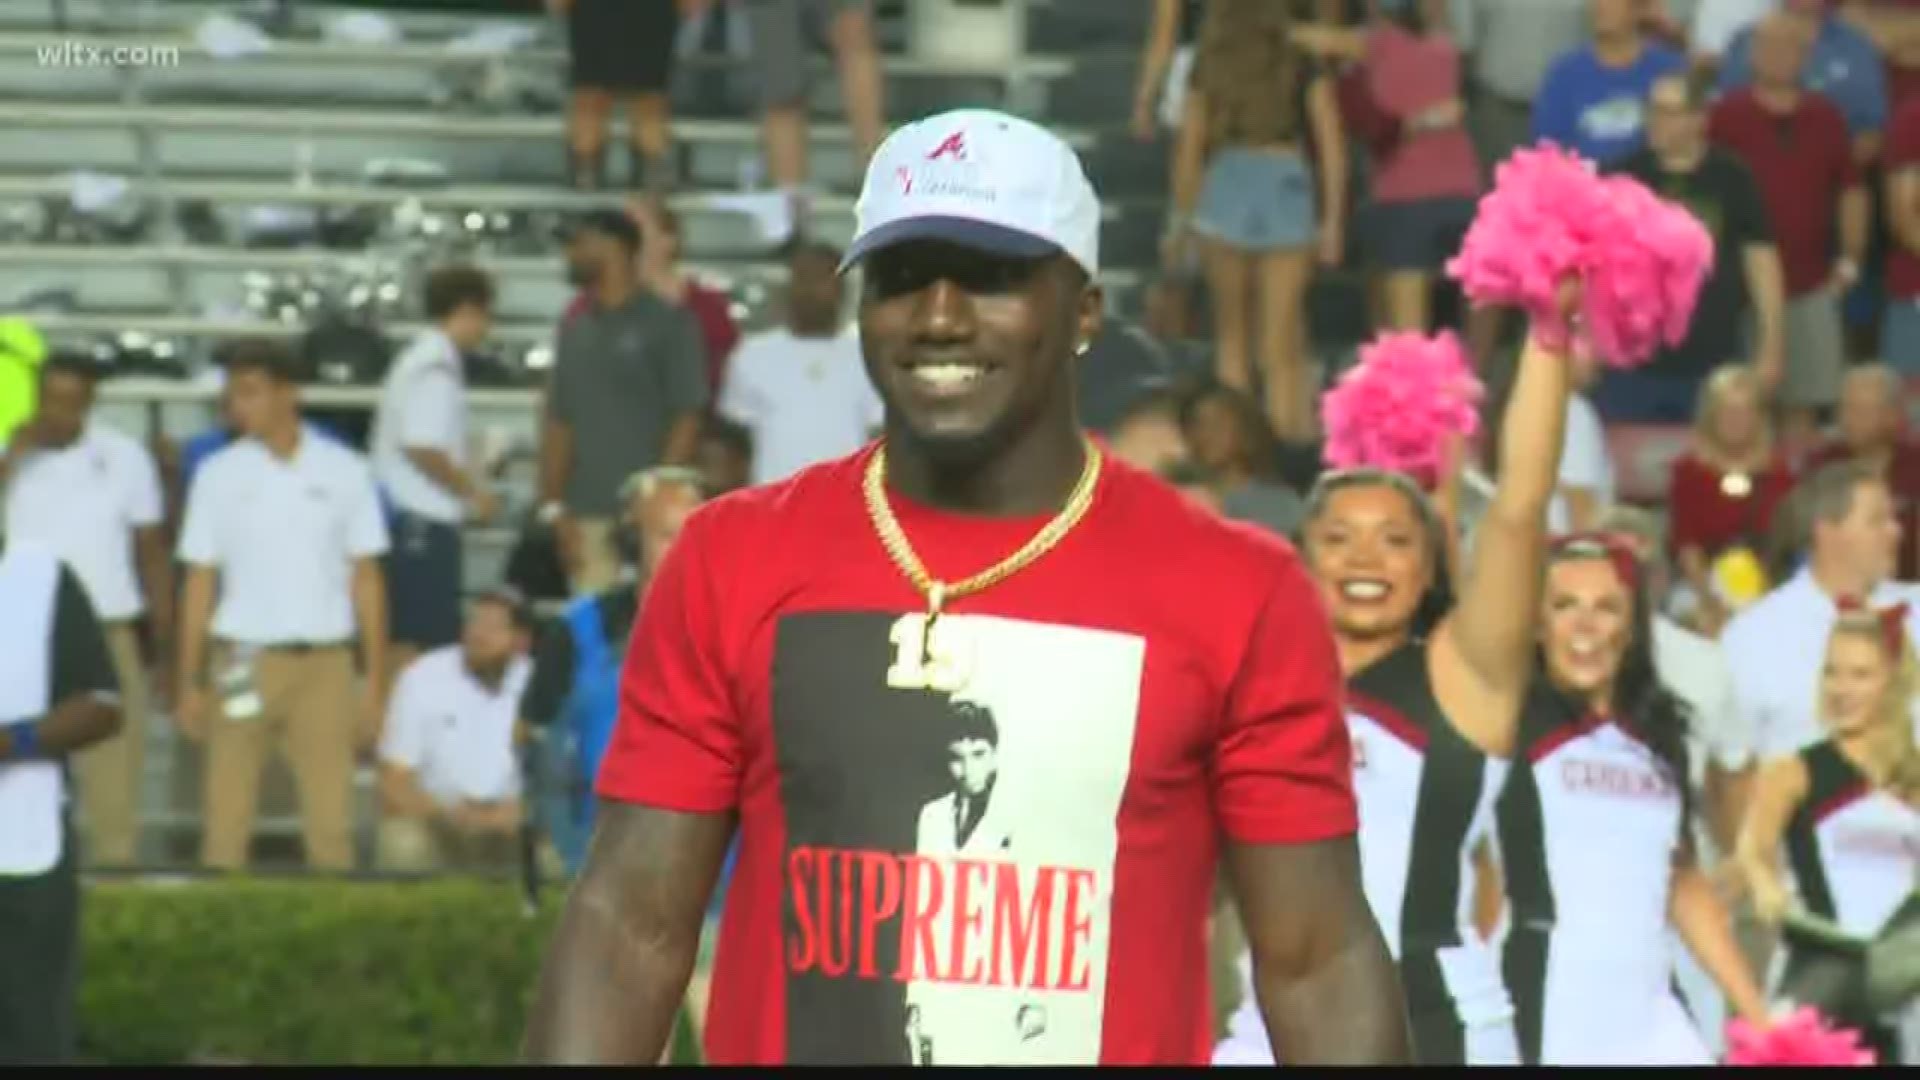 Former Gamecock and current San Francisco 49ers receiver Deebo Samuel was at Williams-Brice Stadium Saturday where he served as the celebrity starter.